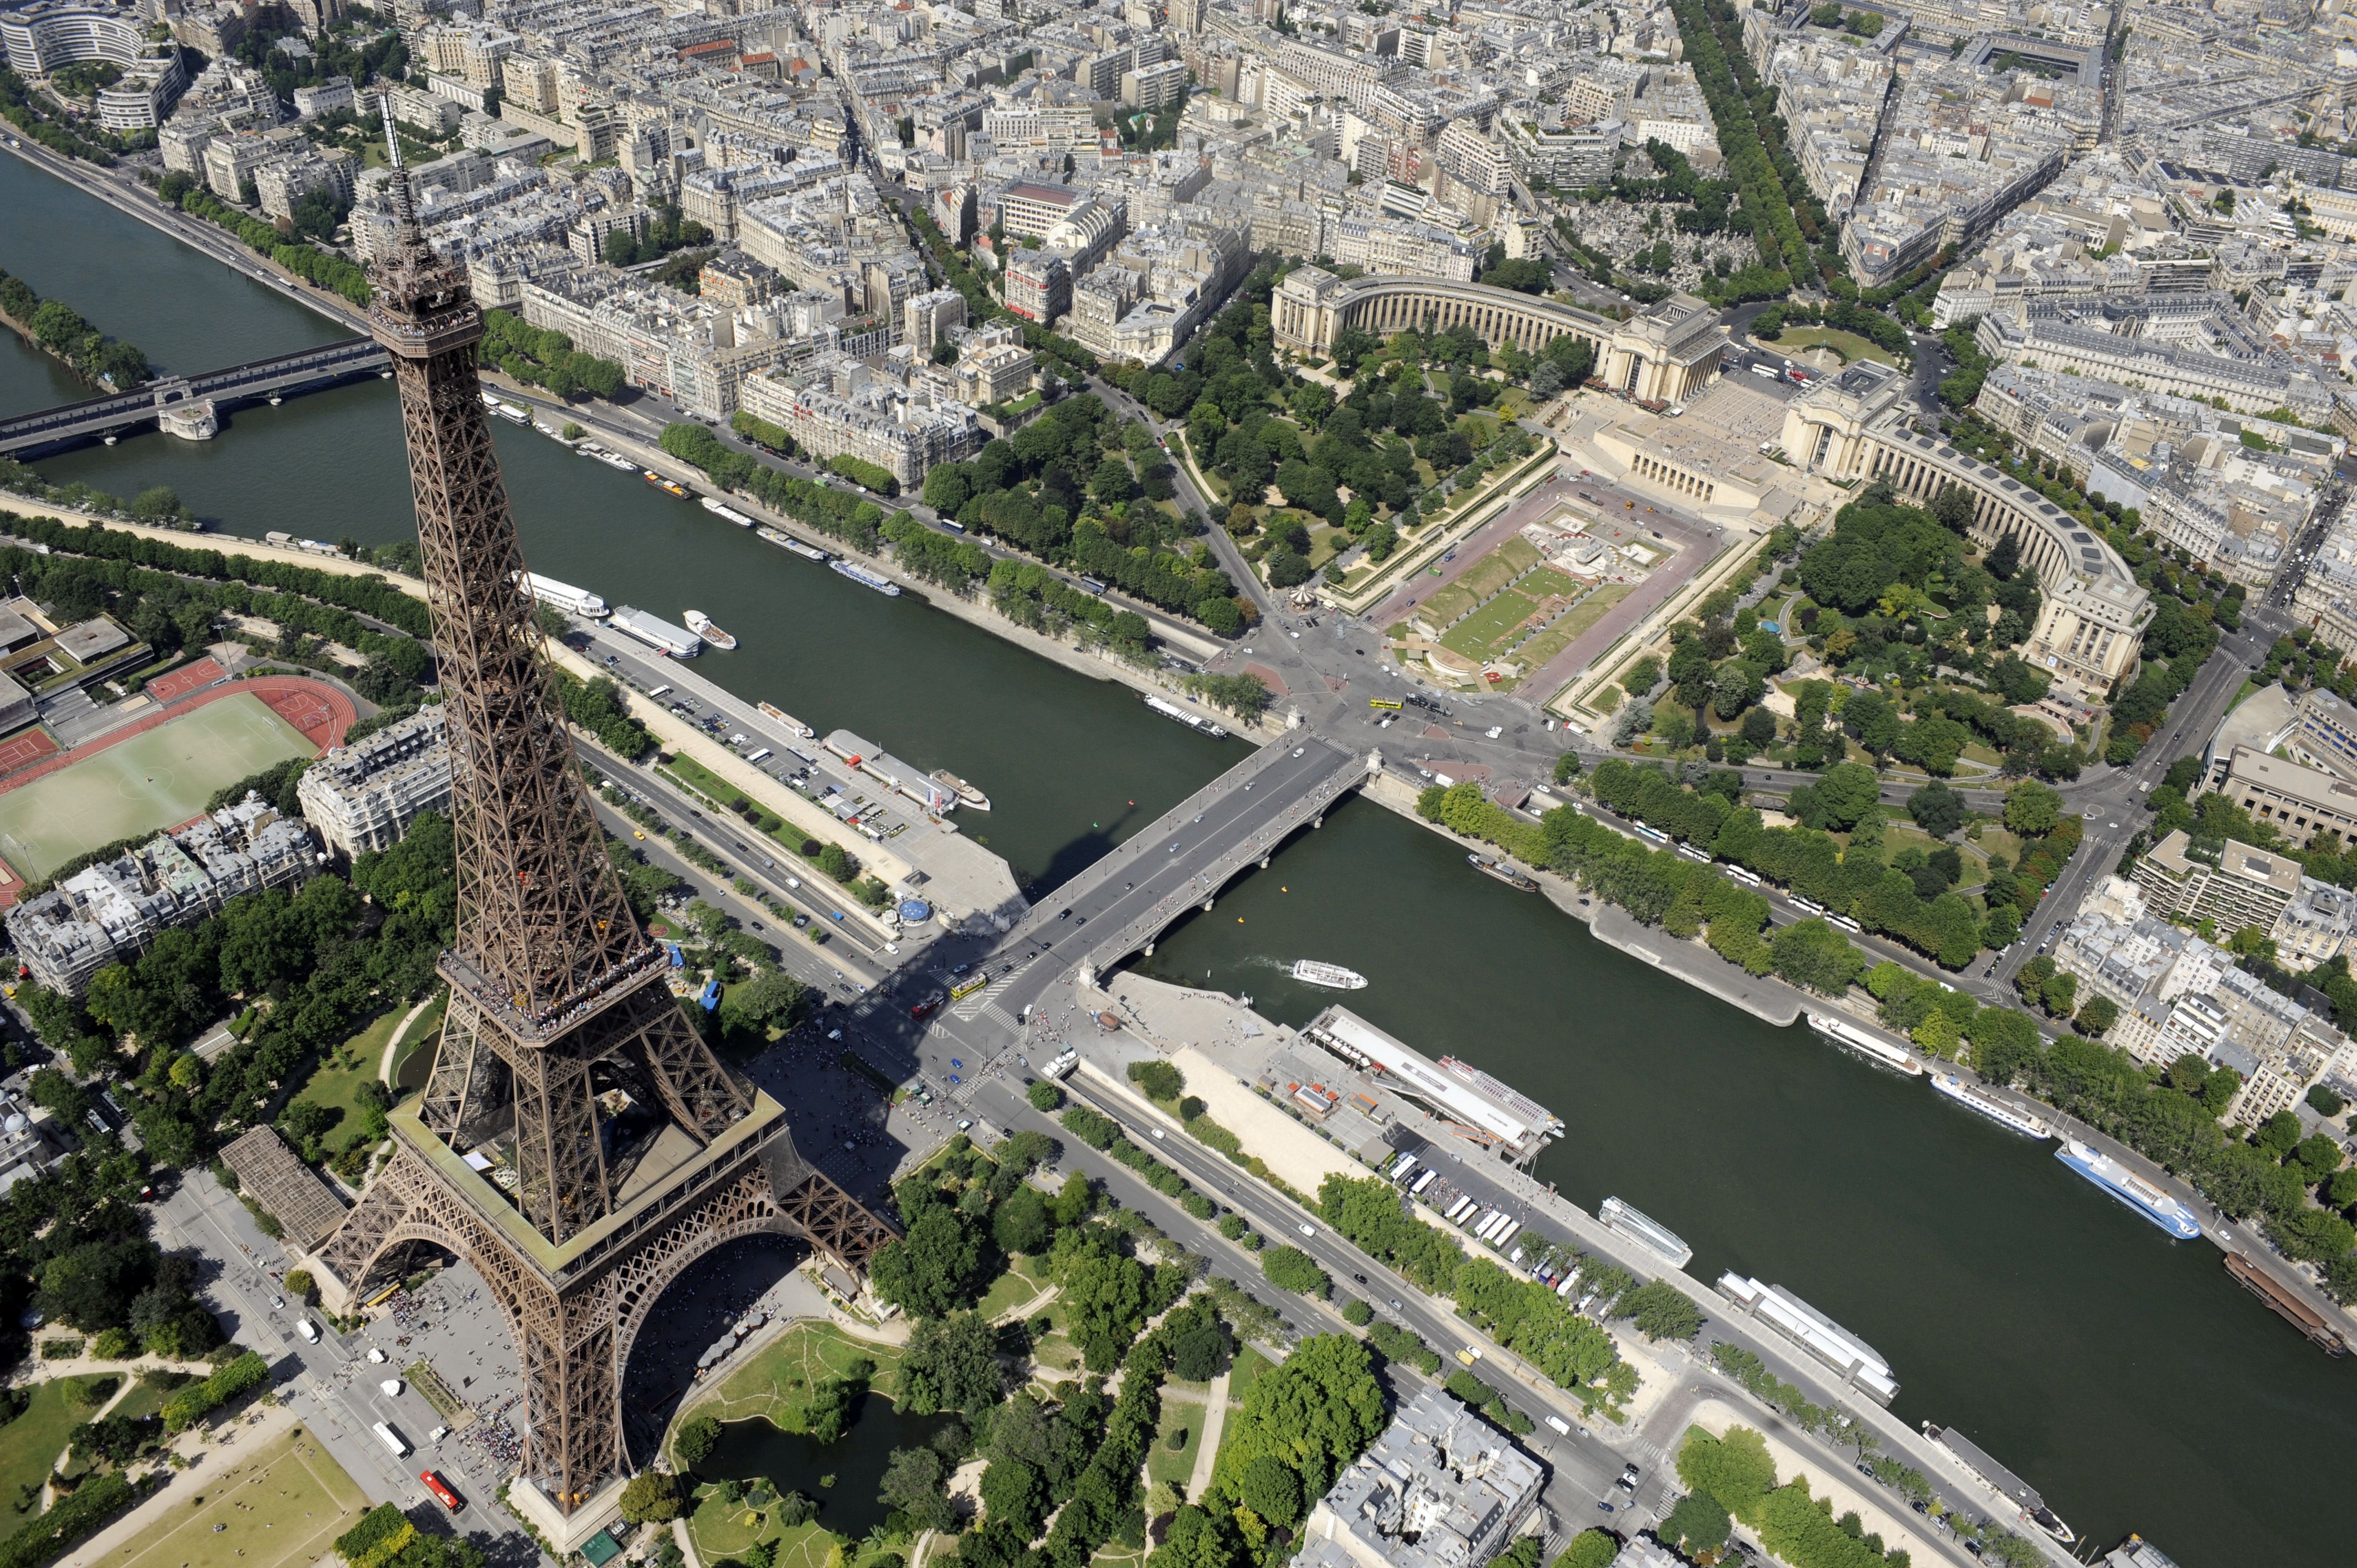 Eiffel Tower guide: What you need to know before you go | CNN